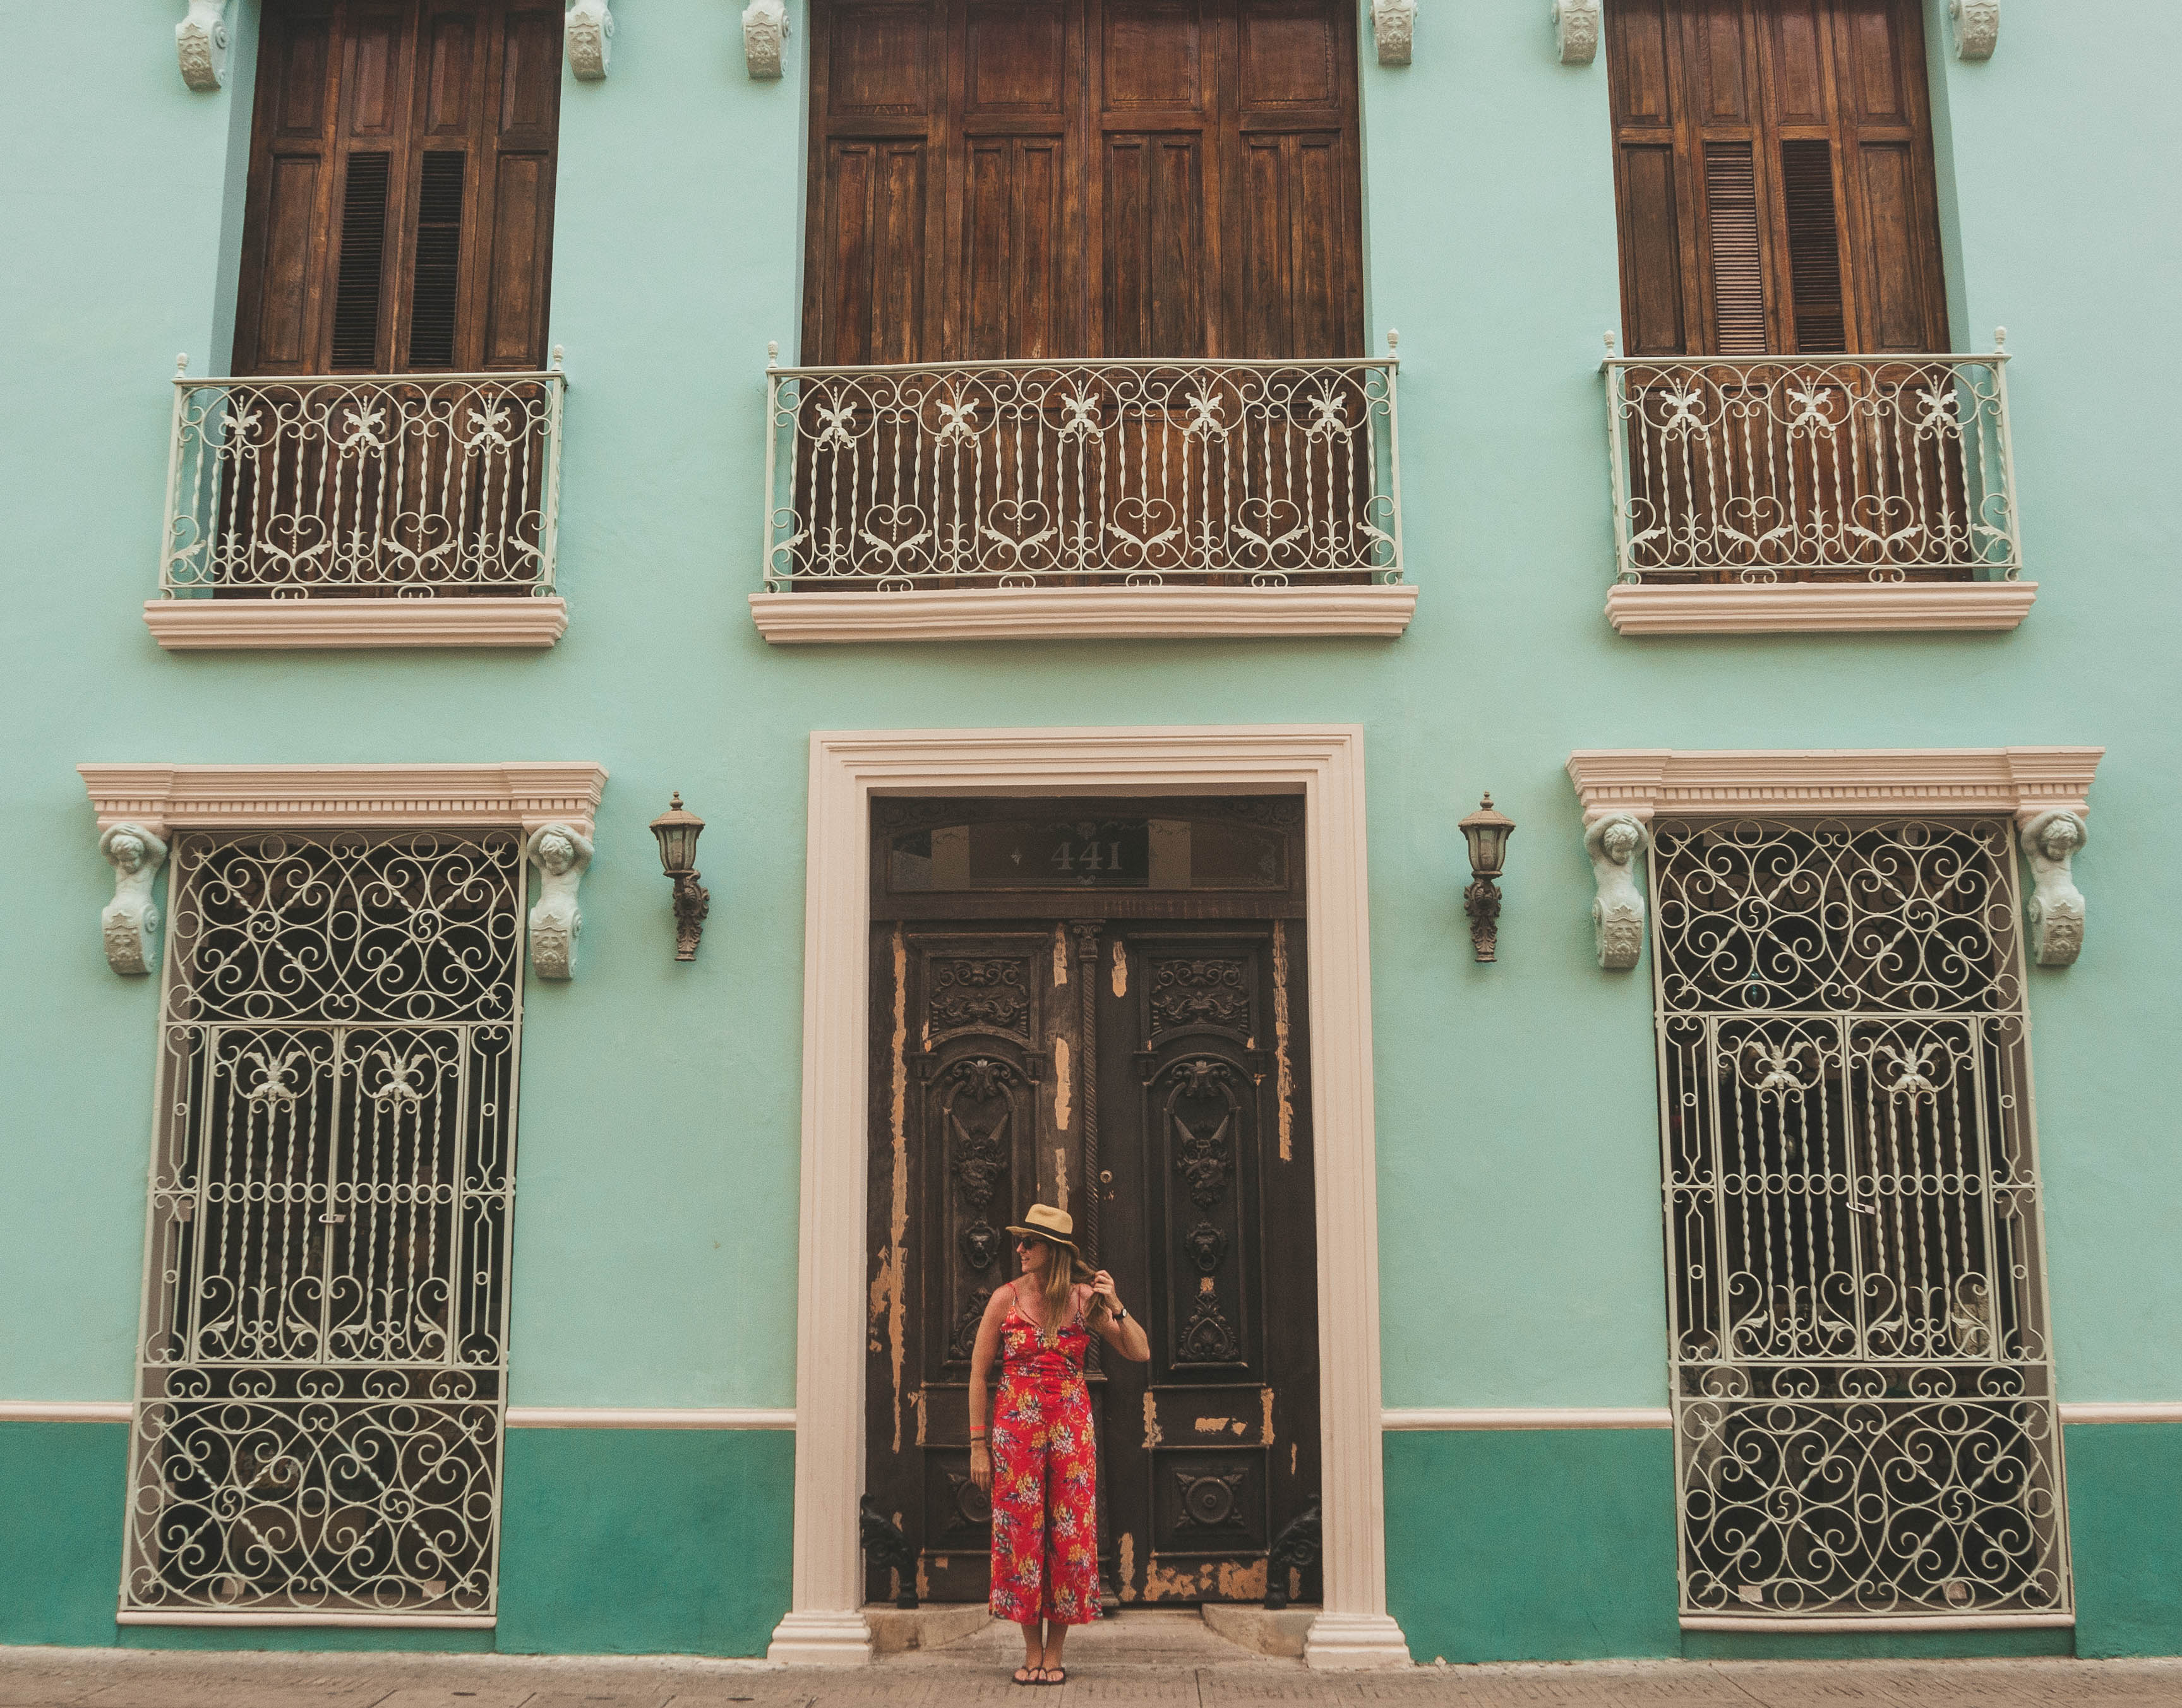 Adventures in Mexico | How to spend a weekend in Merida